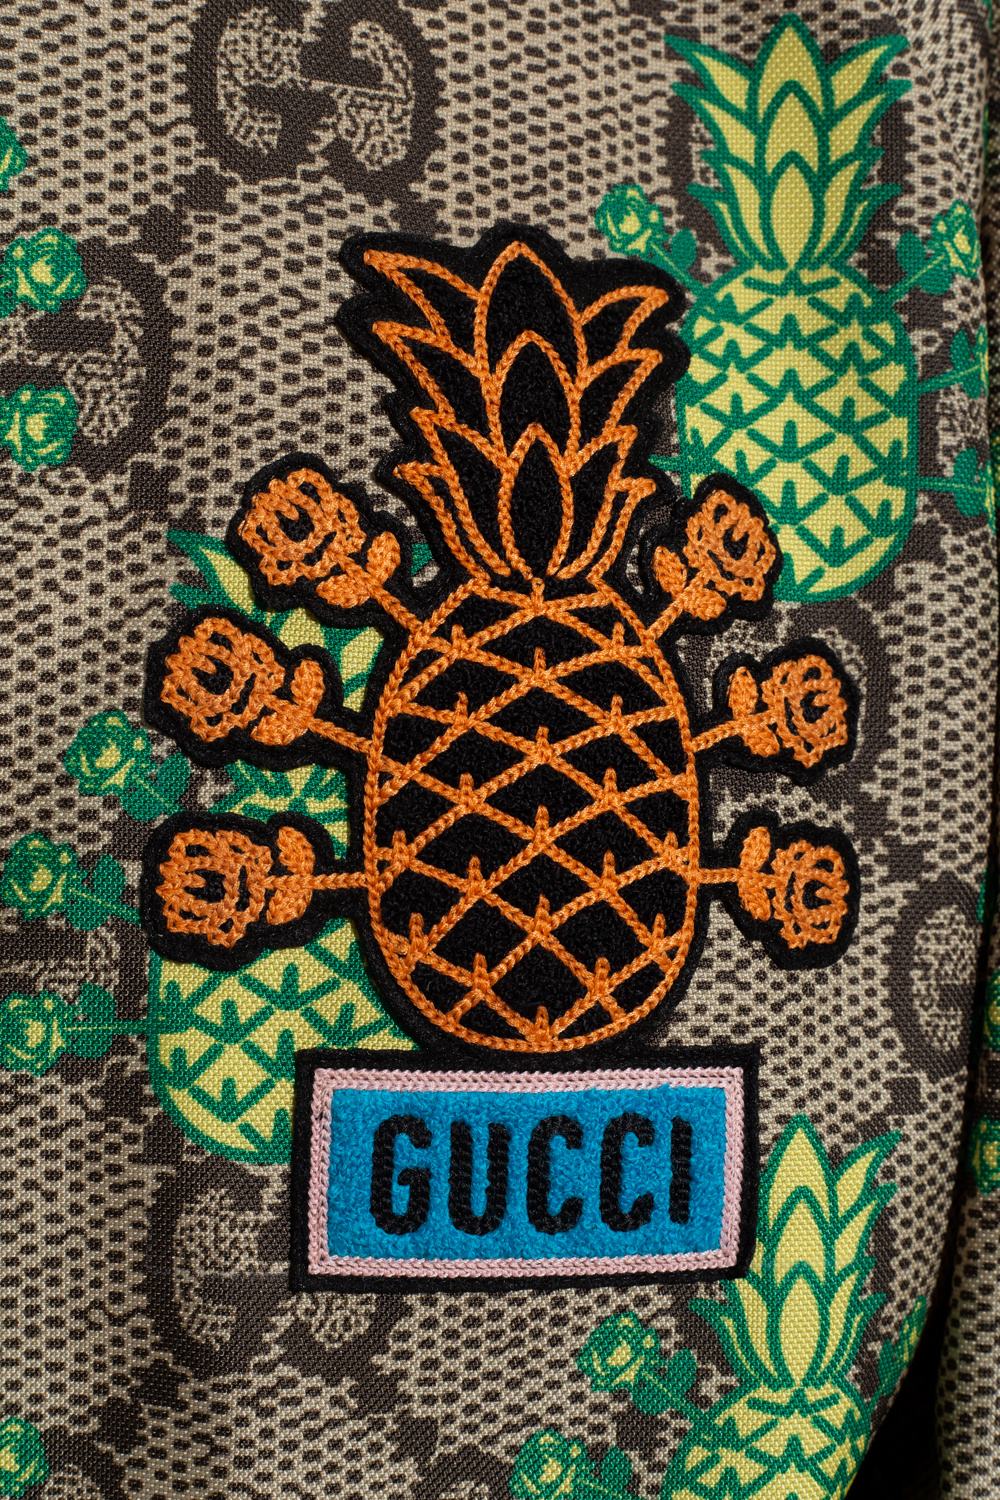 Gucci – Pineapple Capsule Collection